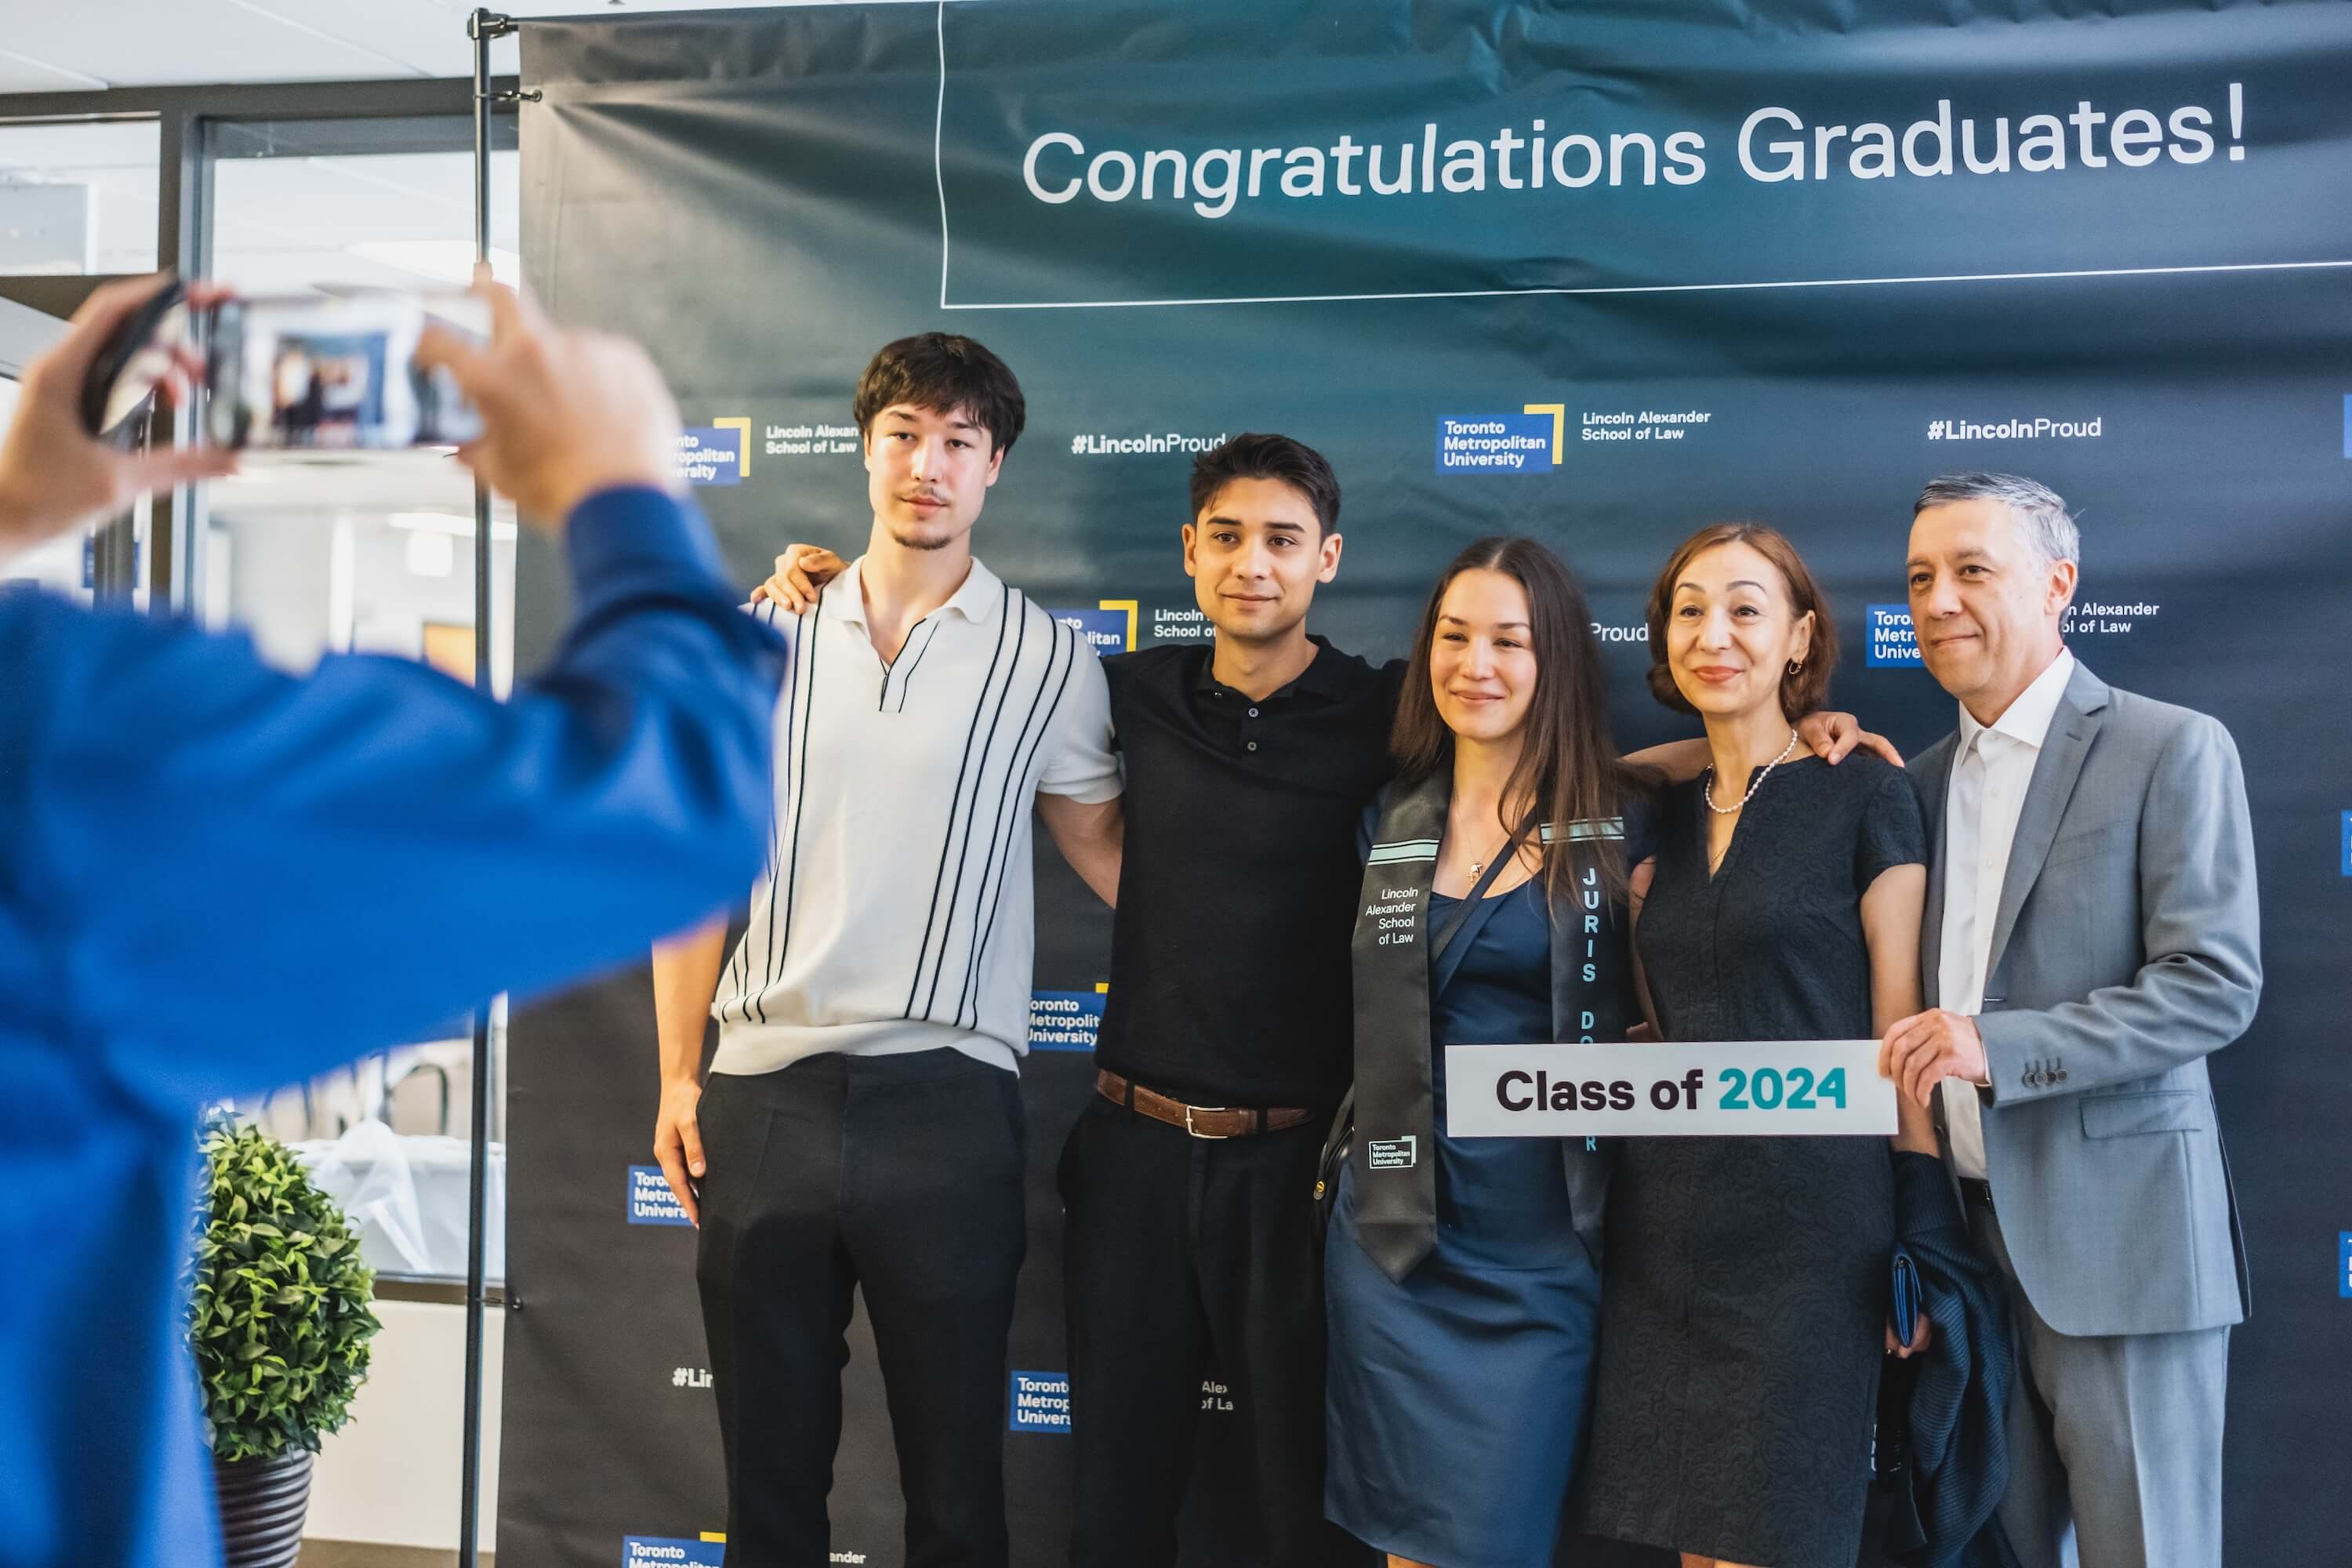 A small group of people standing in front of a "Congratulations Graduates!" banner having their photo taken.